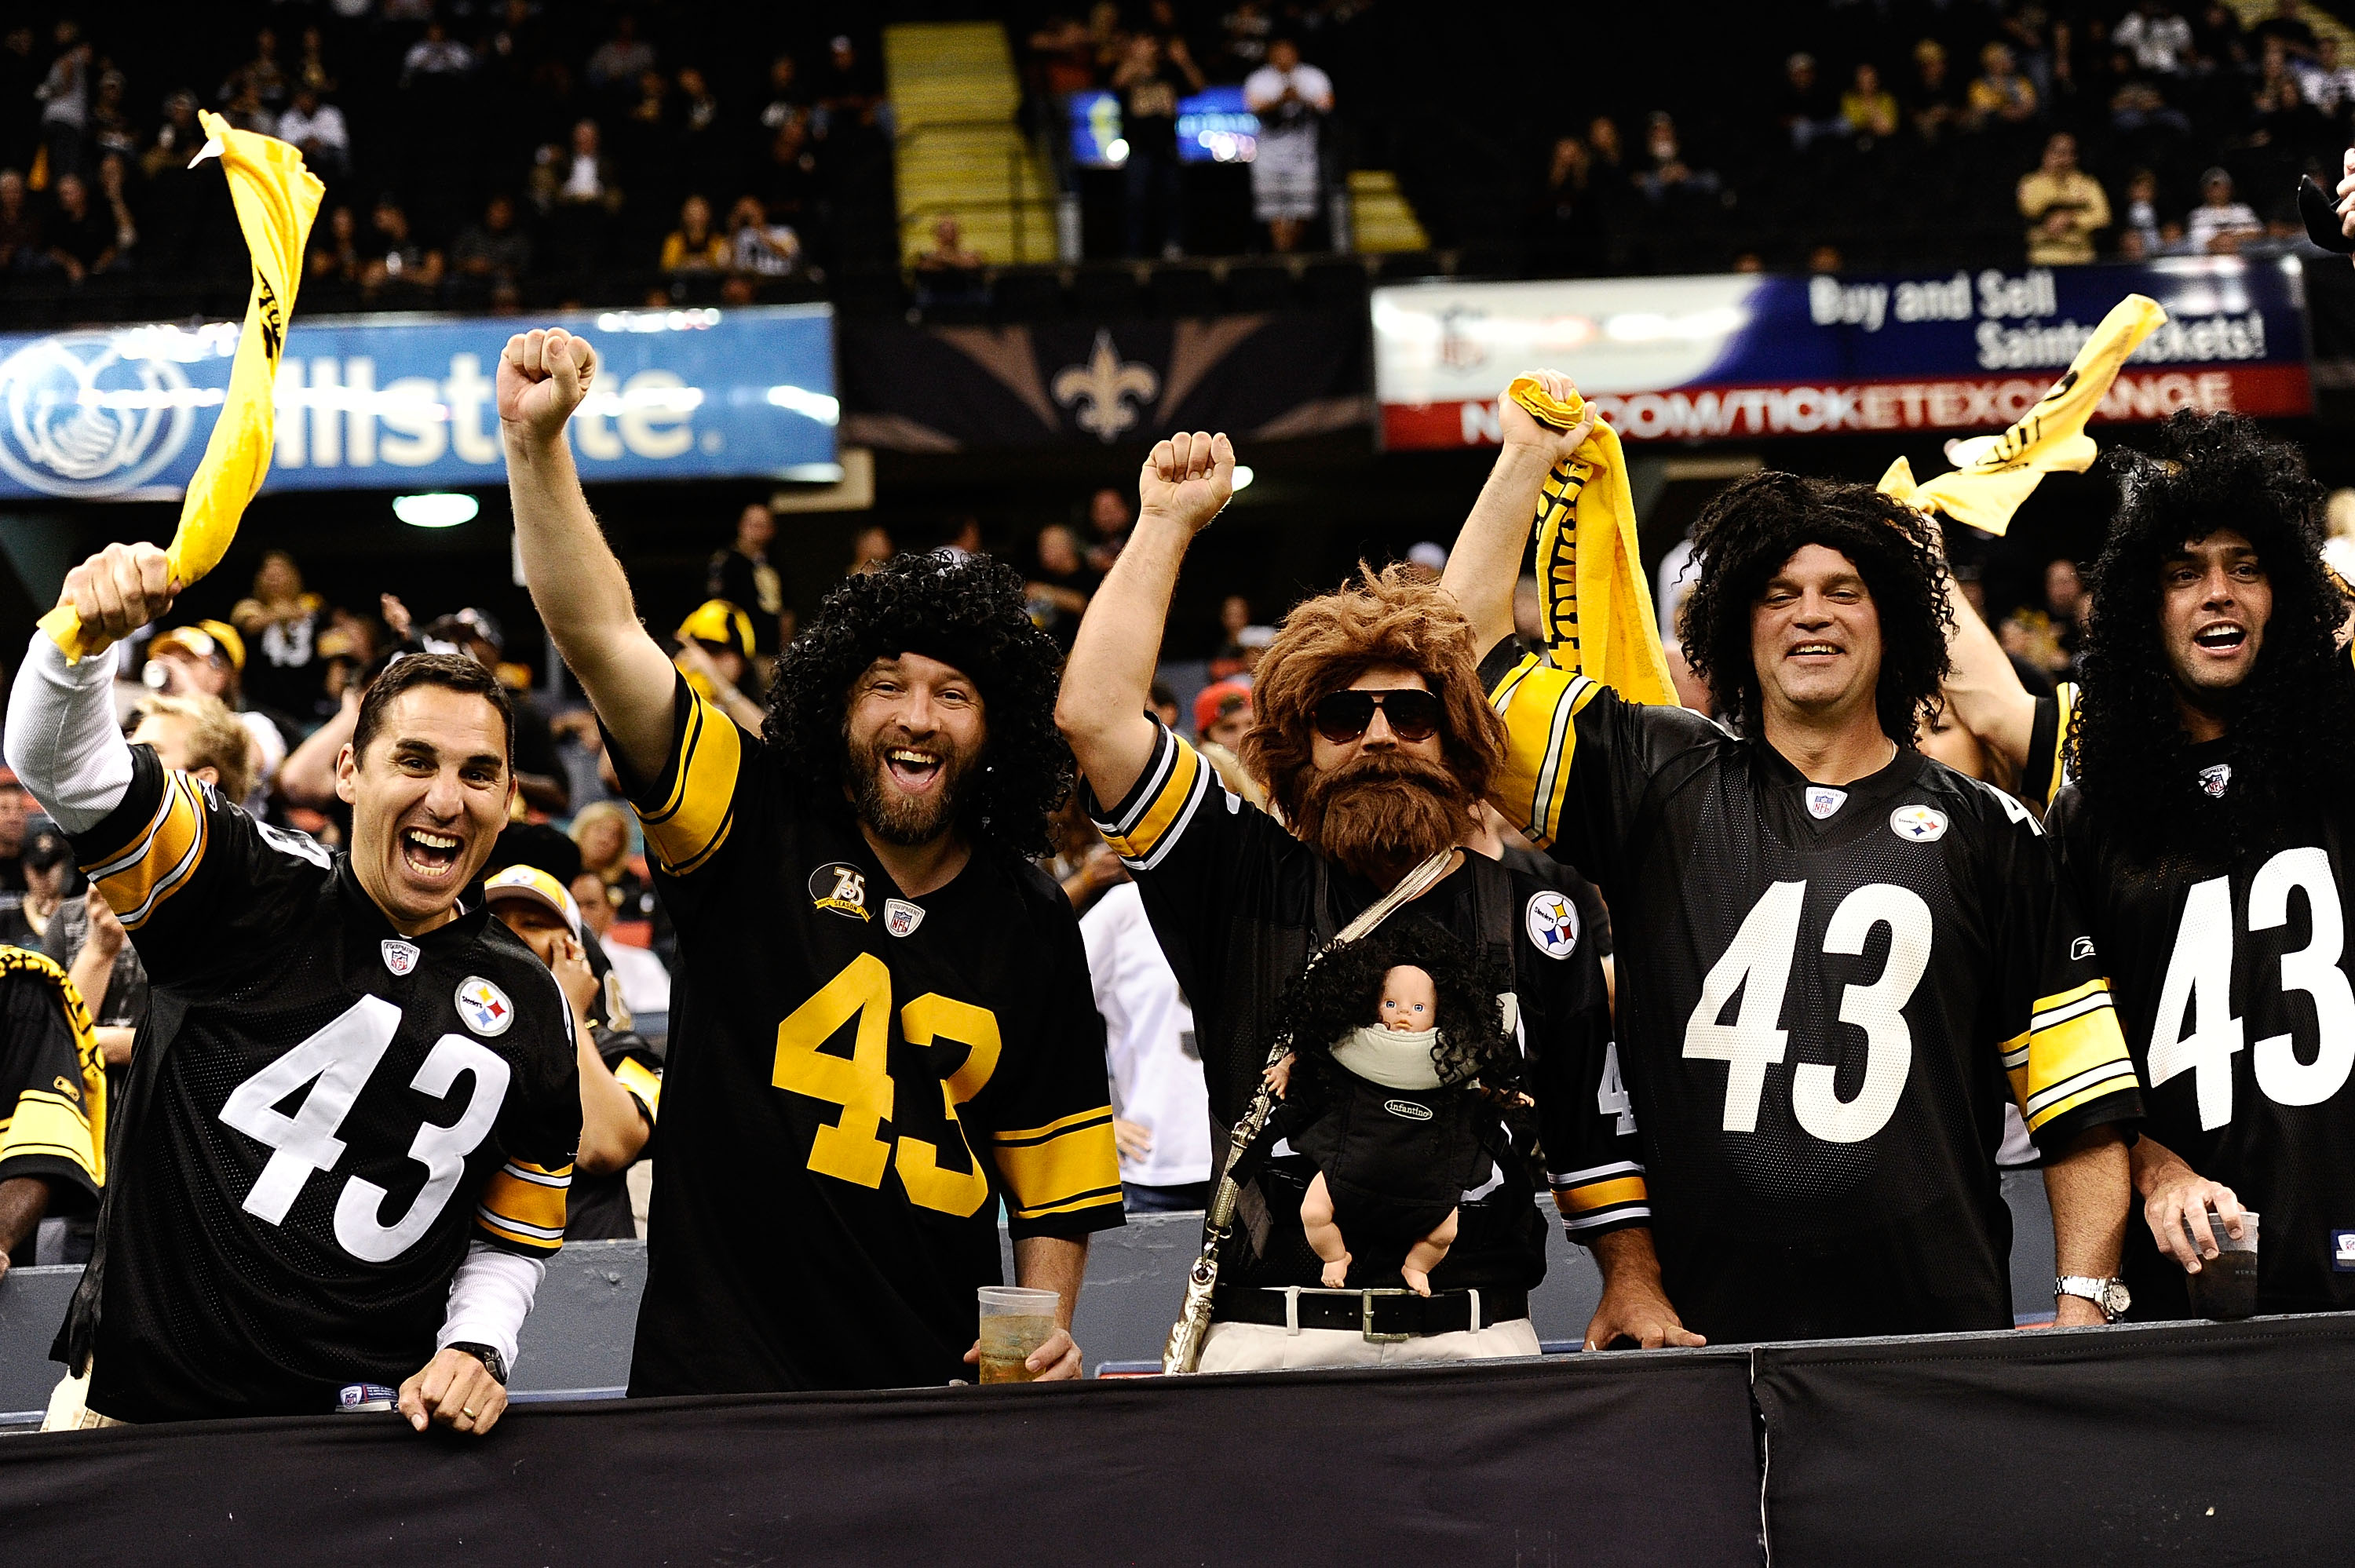 NEW ORLEANS - OCTOBER 31:  Fans dressed as Troy Polamalu #43 of the Pittsburgh Steelers pump their fist during the game against the New Orleans Saints at Louisiana Superdome on October 31, 2010 in New Orleans, Louisiana.  The Saints won 20-10 over the Ste